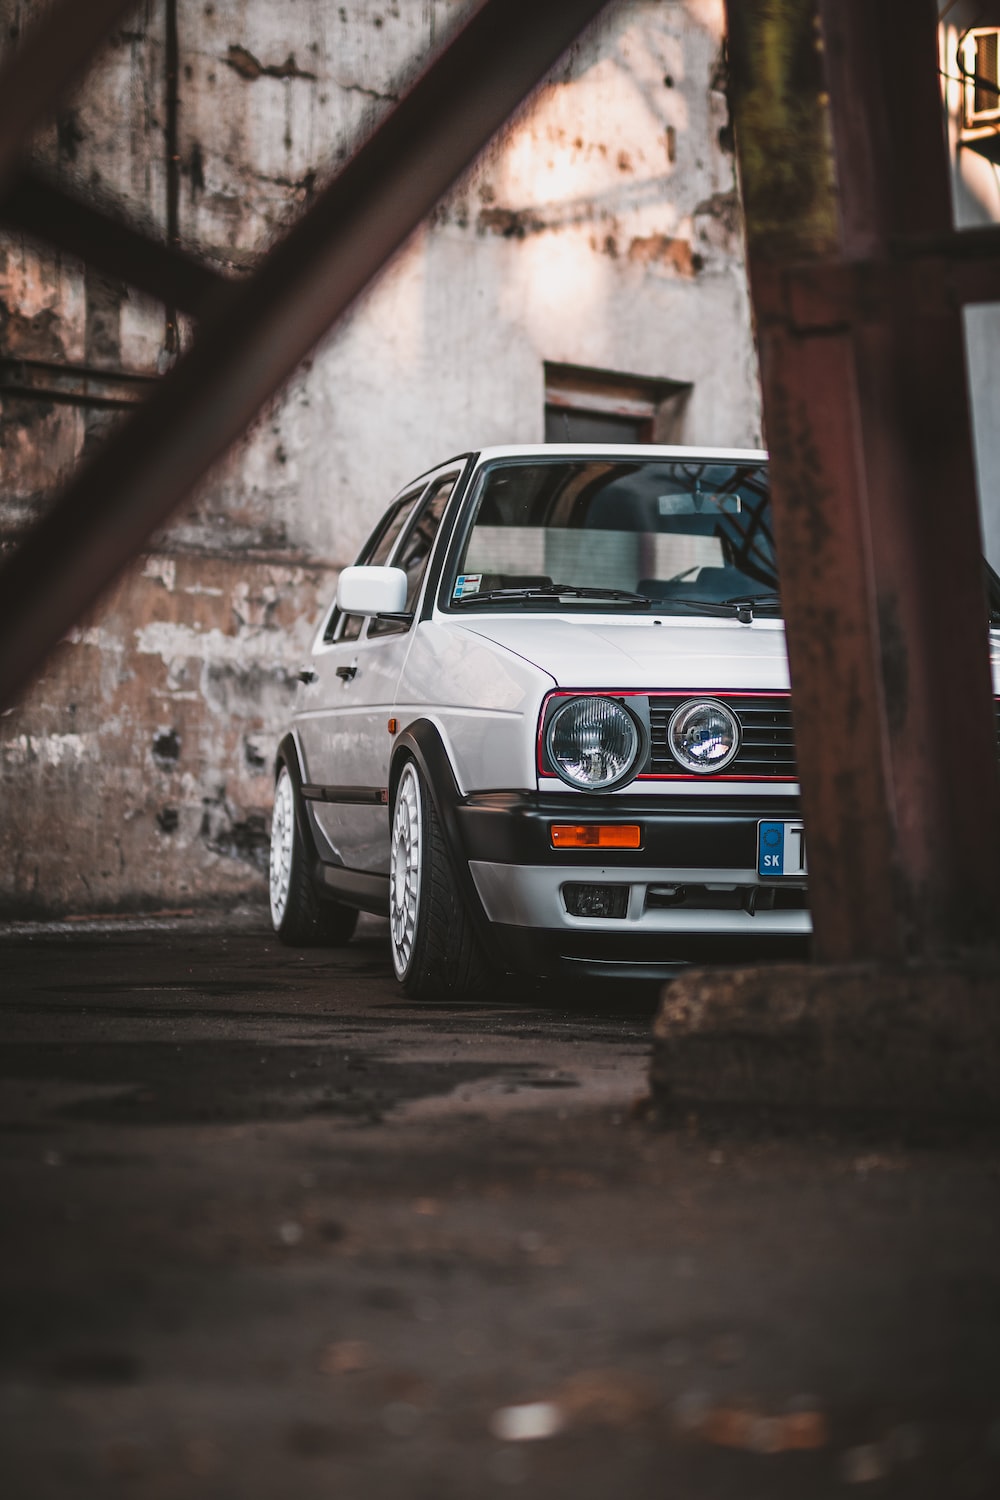 Golf Gti Picture. Download Free Image